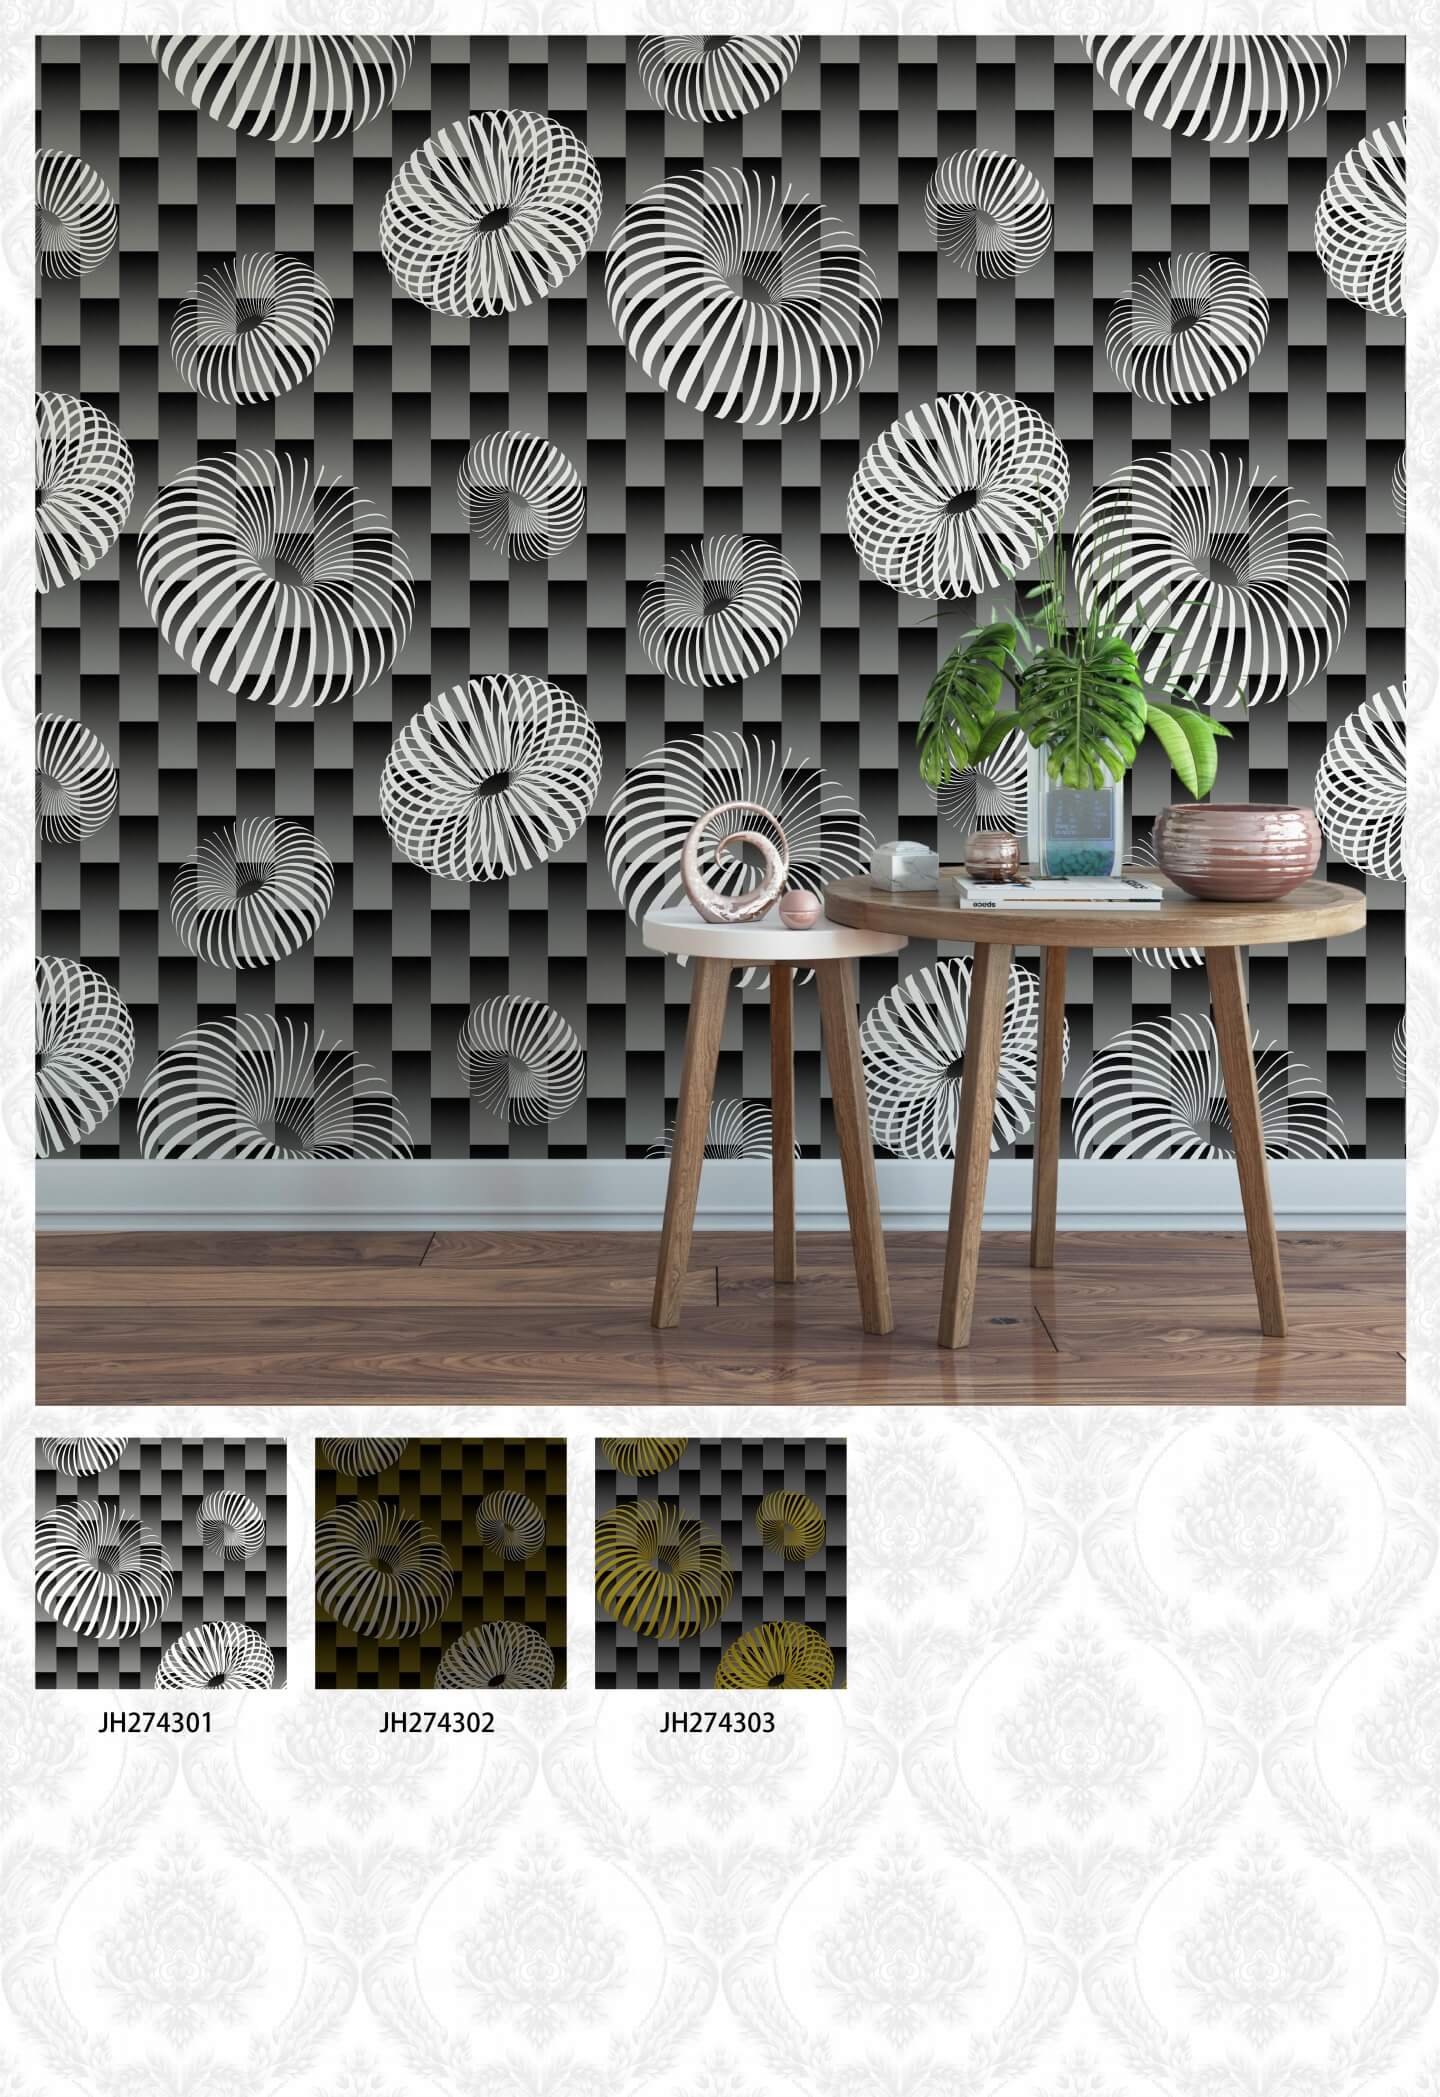 3D Design, Modern Room D&eacute;cor Wallpaper PVC Wallpapers for Living Areas, Wooden Brown Wall Interior Wallpapers (12)